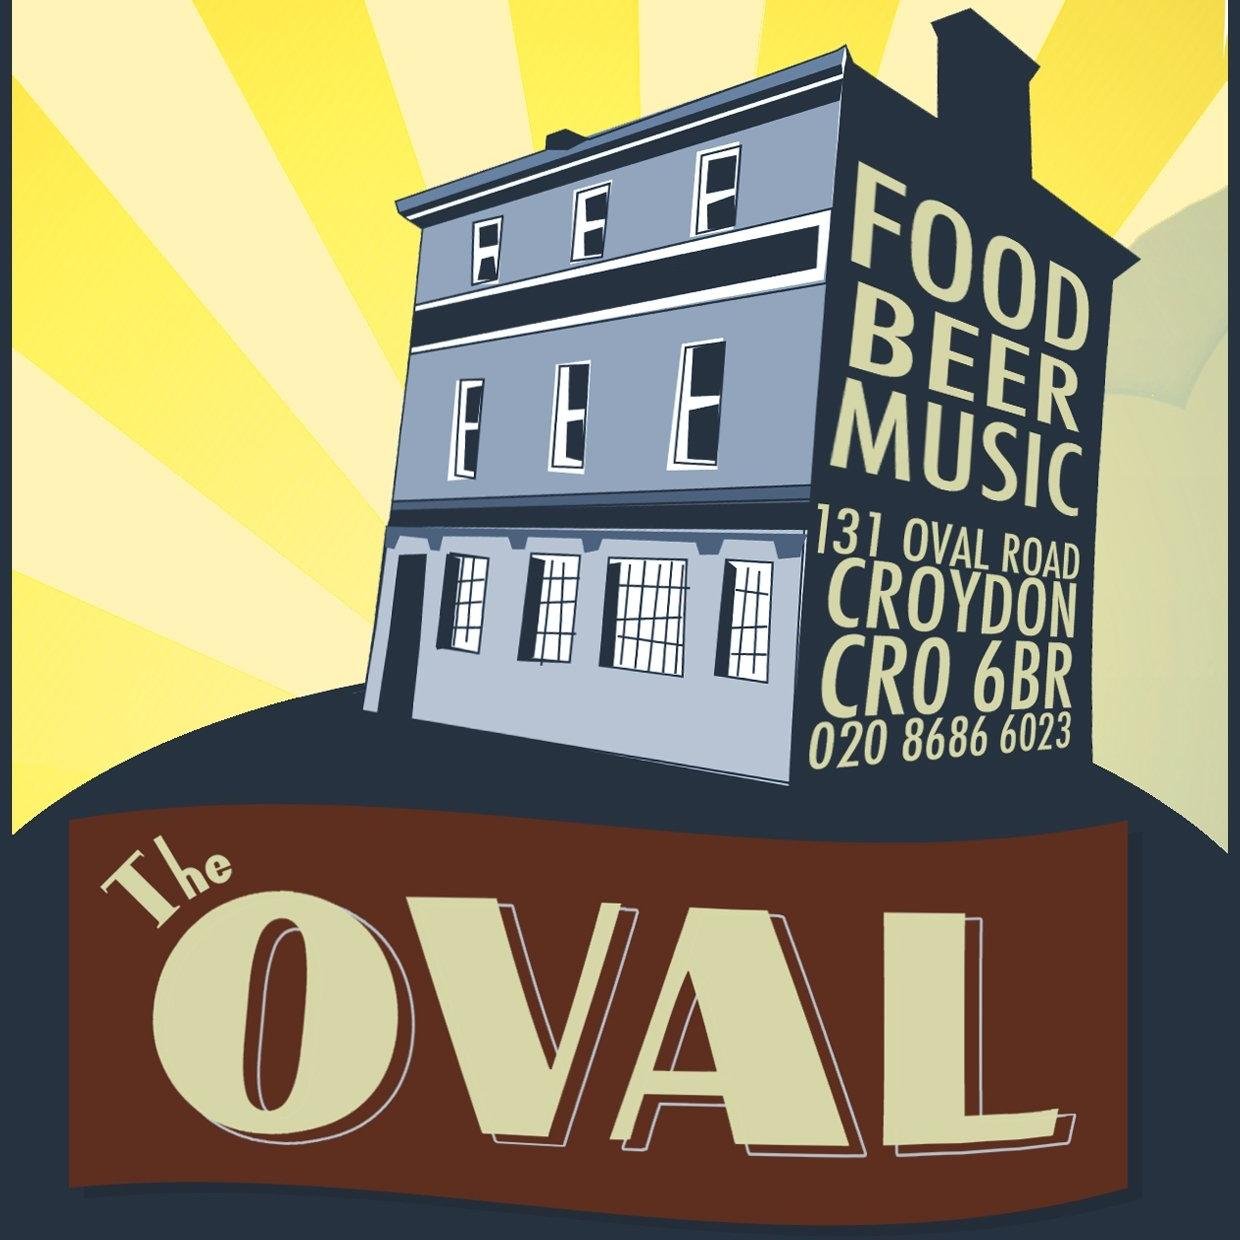 Welcome to the twitter feed for The Oval Tavern - Croydon's foremost venue and best kept secret.